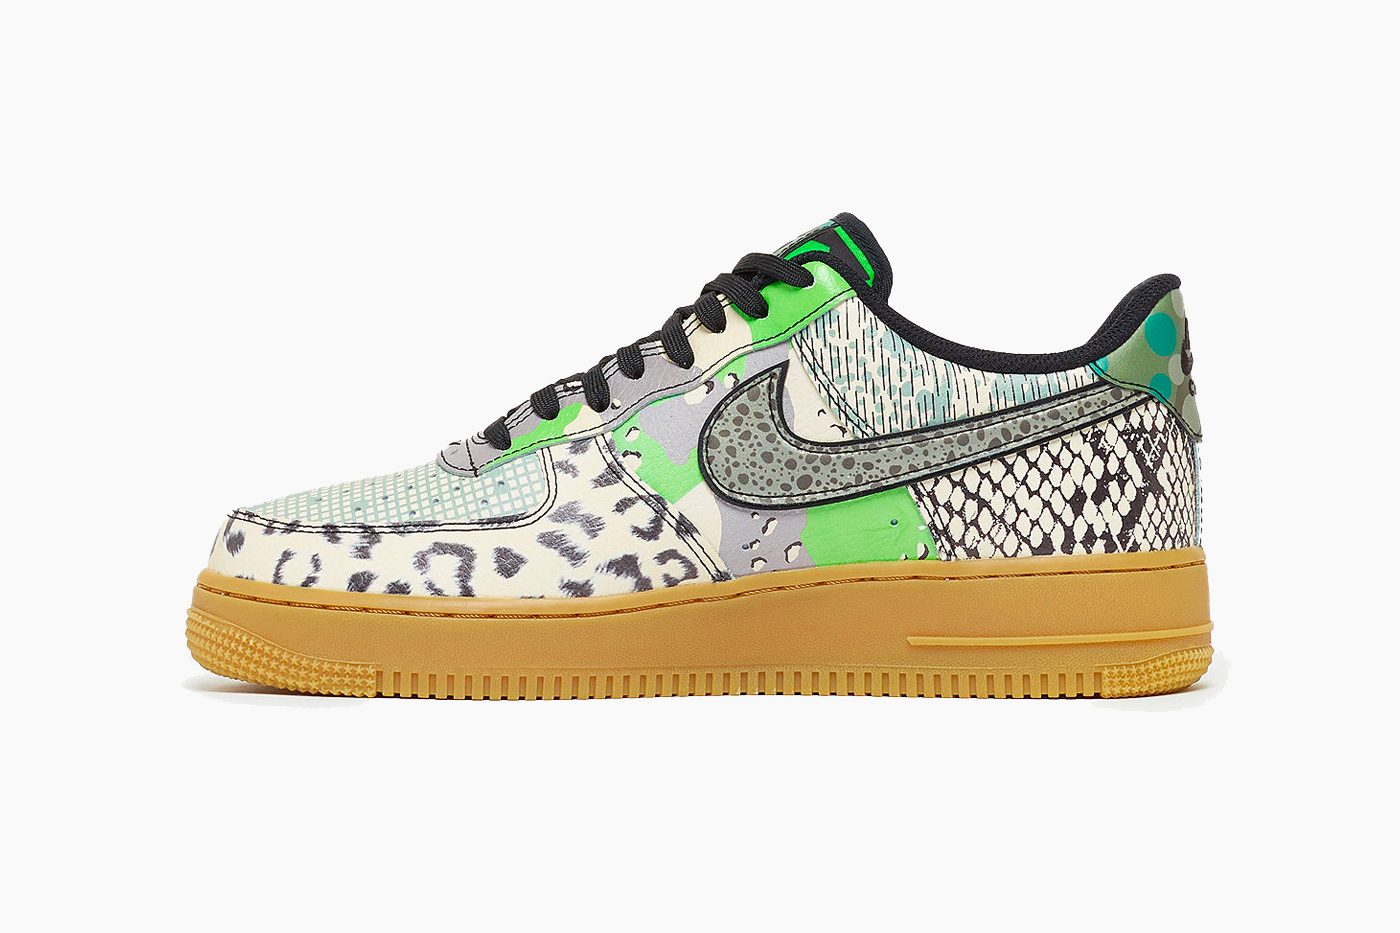 Nike Air Force 1 '07 "City of Dreams" Info |